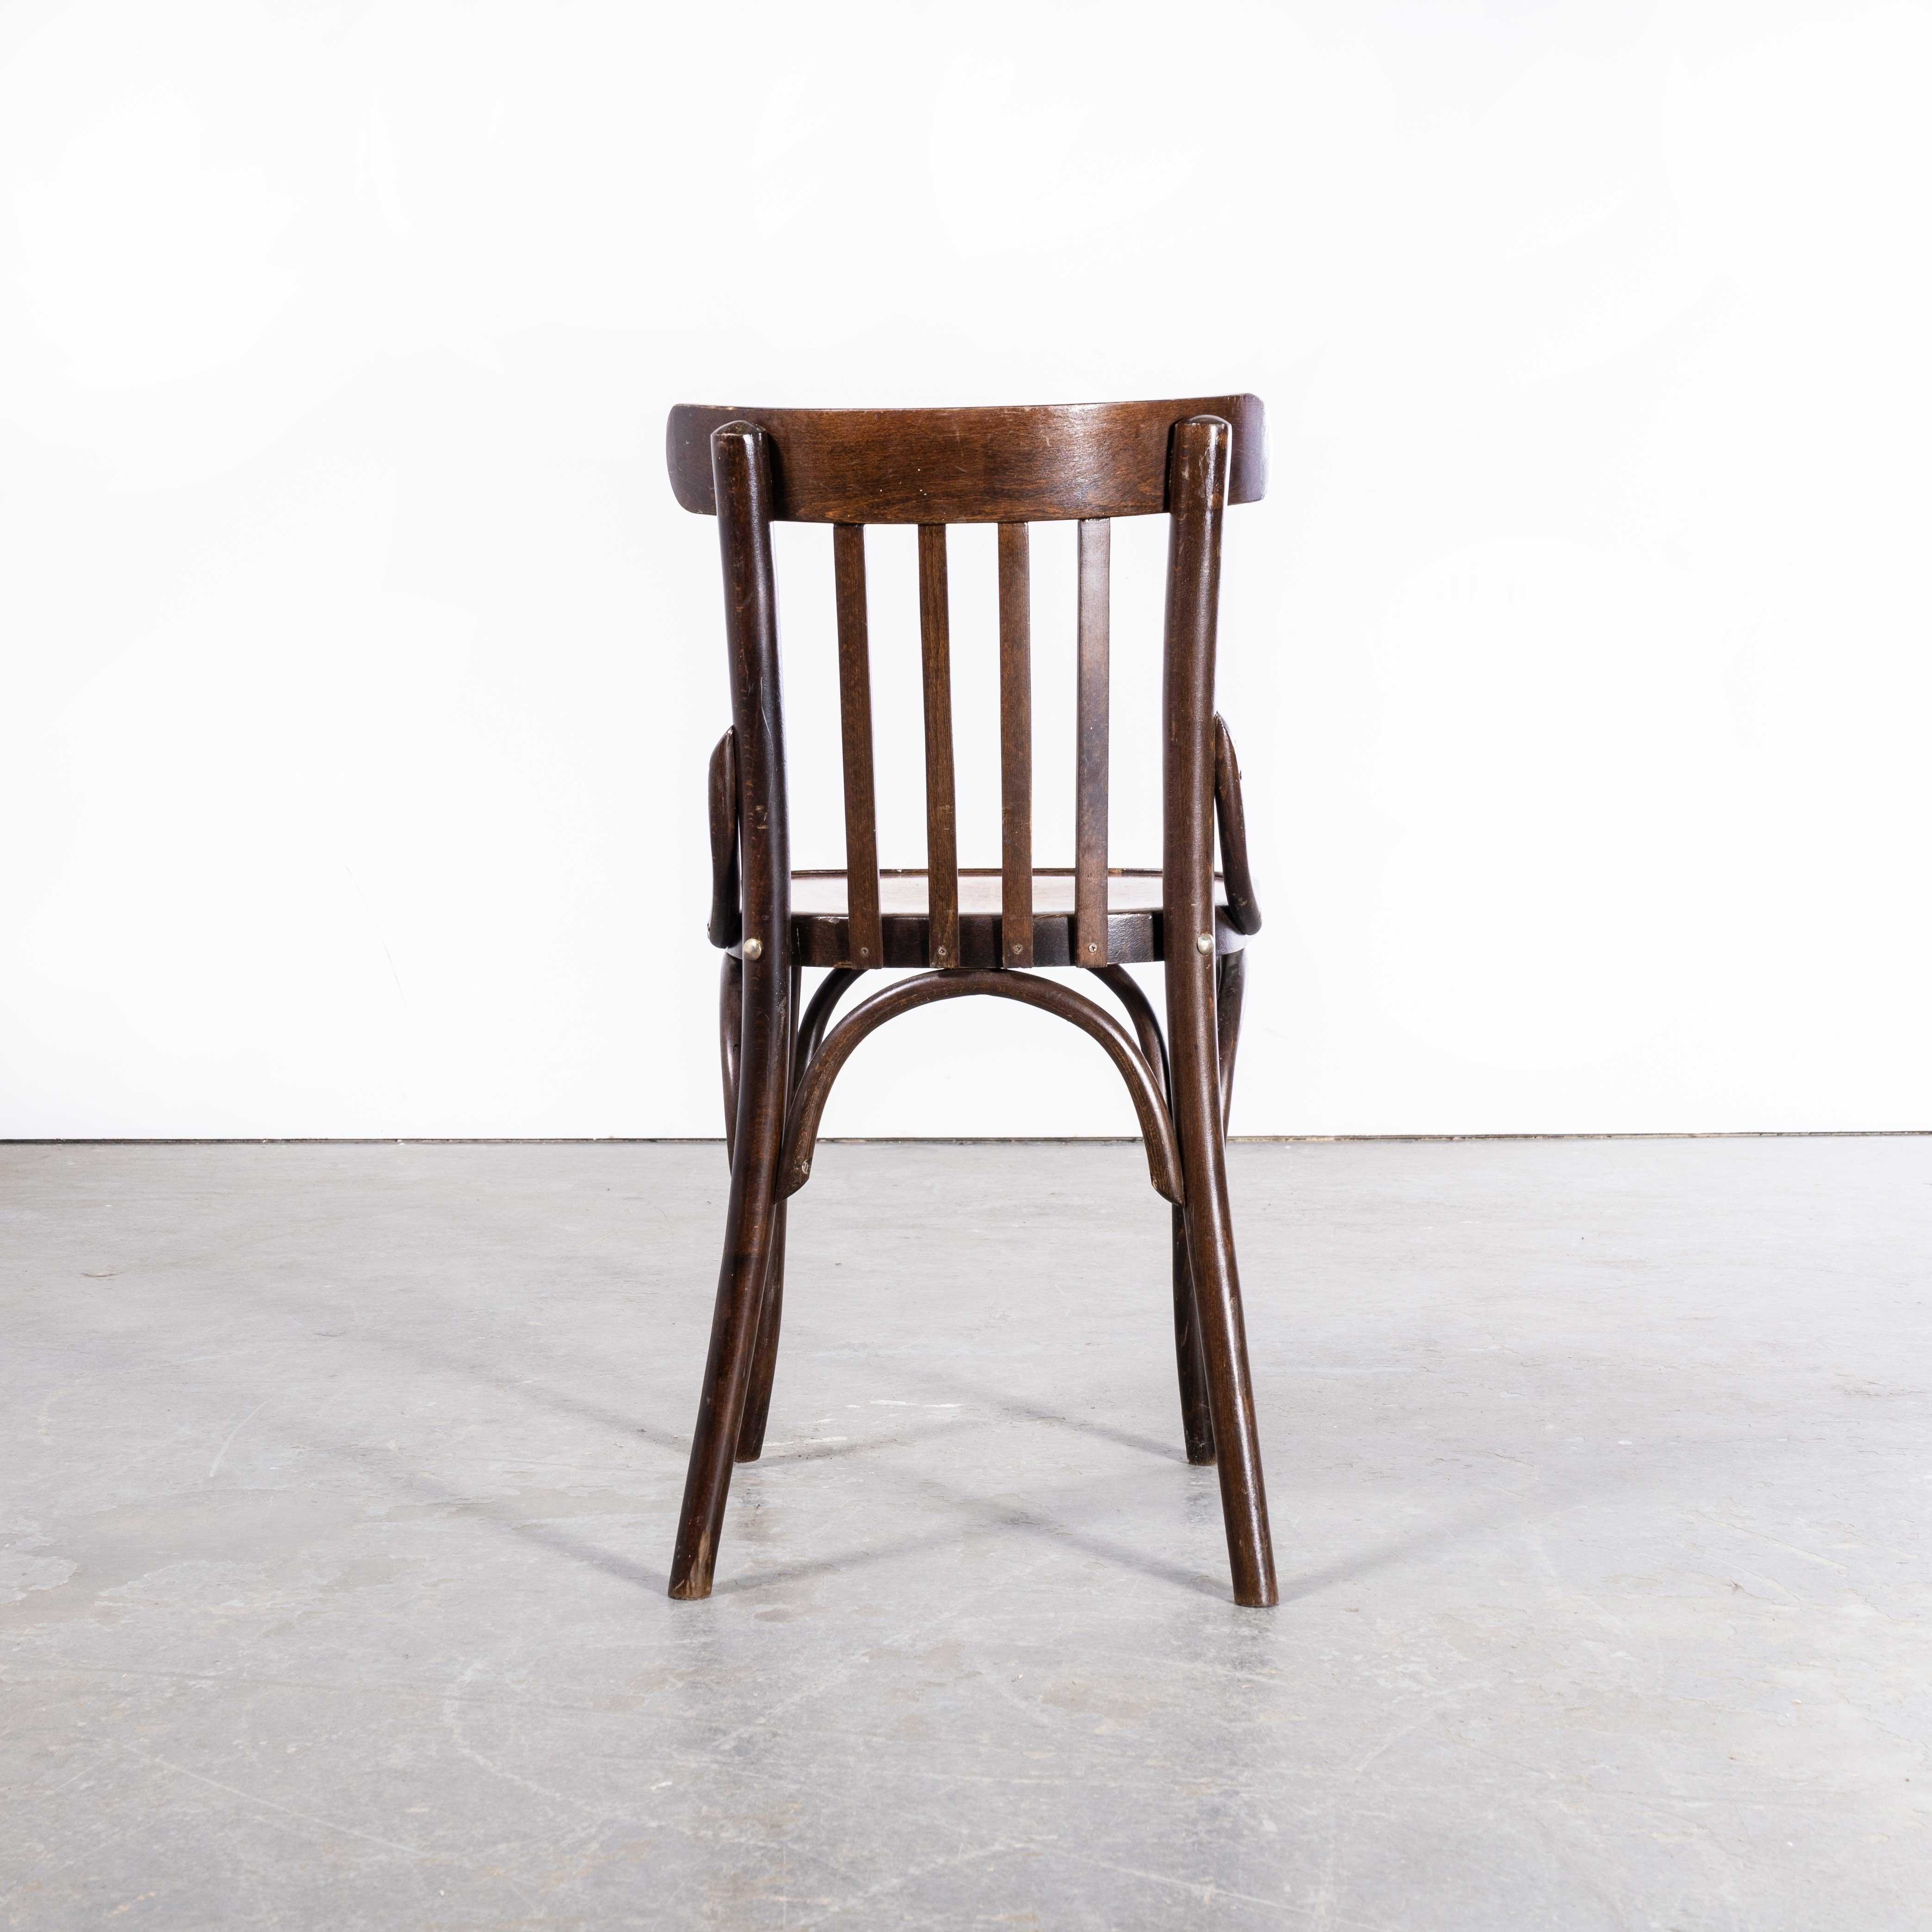 1950s Baumann Bentwood Bistro Dining Chair – Tonal – Set Of Six
1950s Baumann Bentwood Bistro Dining Chair – Tonal – Set Of Six. Classic Beech bistro chair made in France by the maker Baumann. Baumann is a slightly off the radar French producer